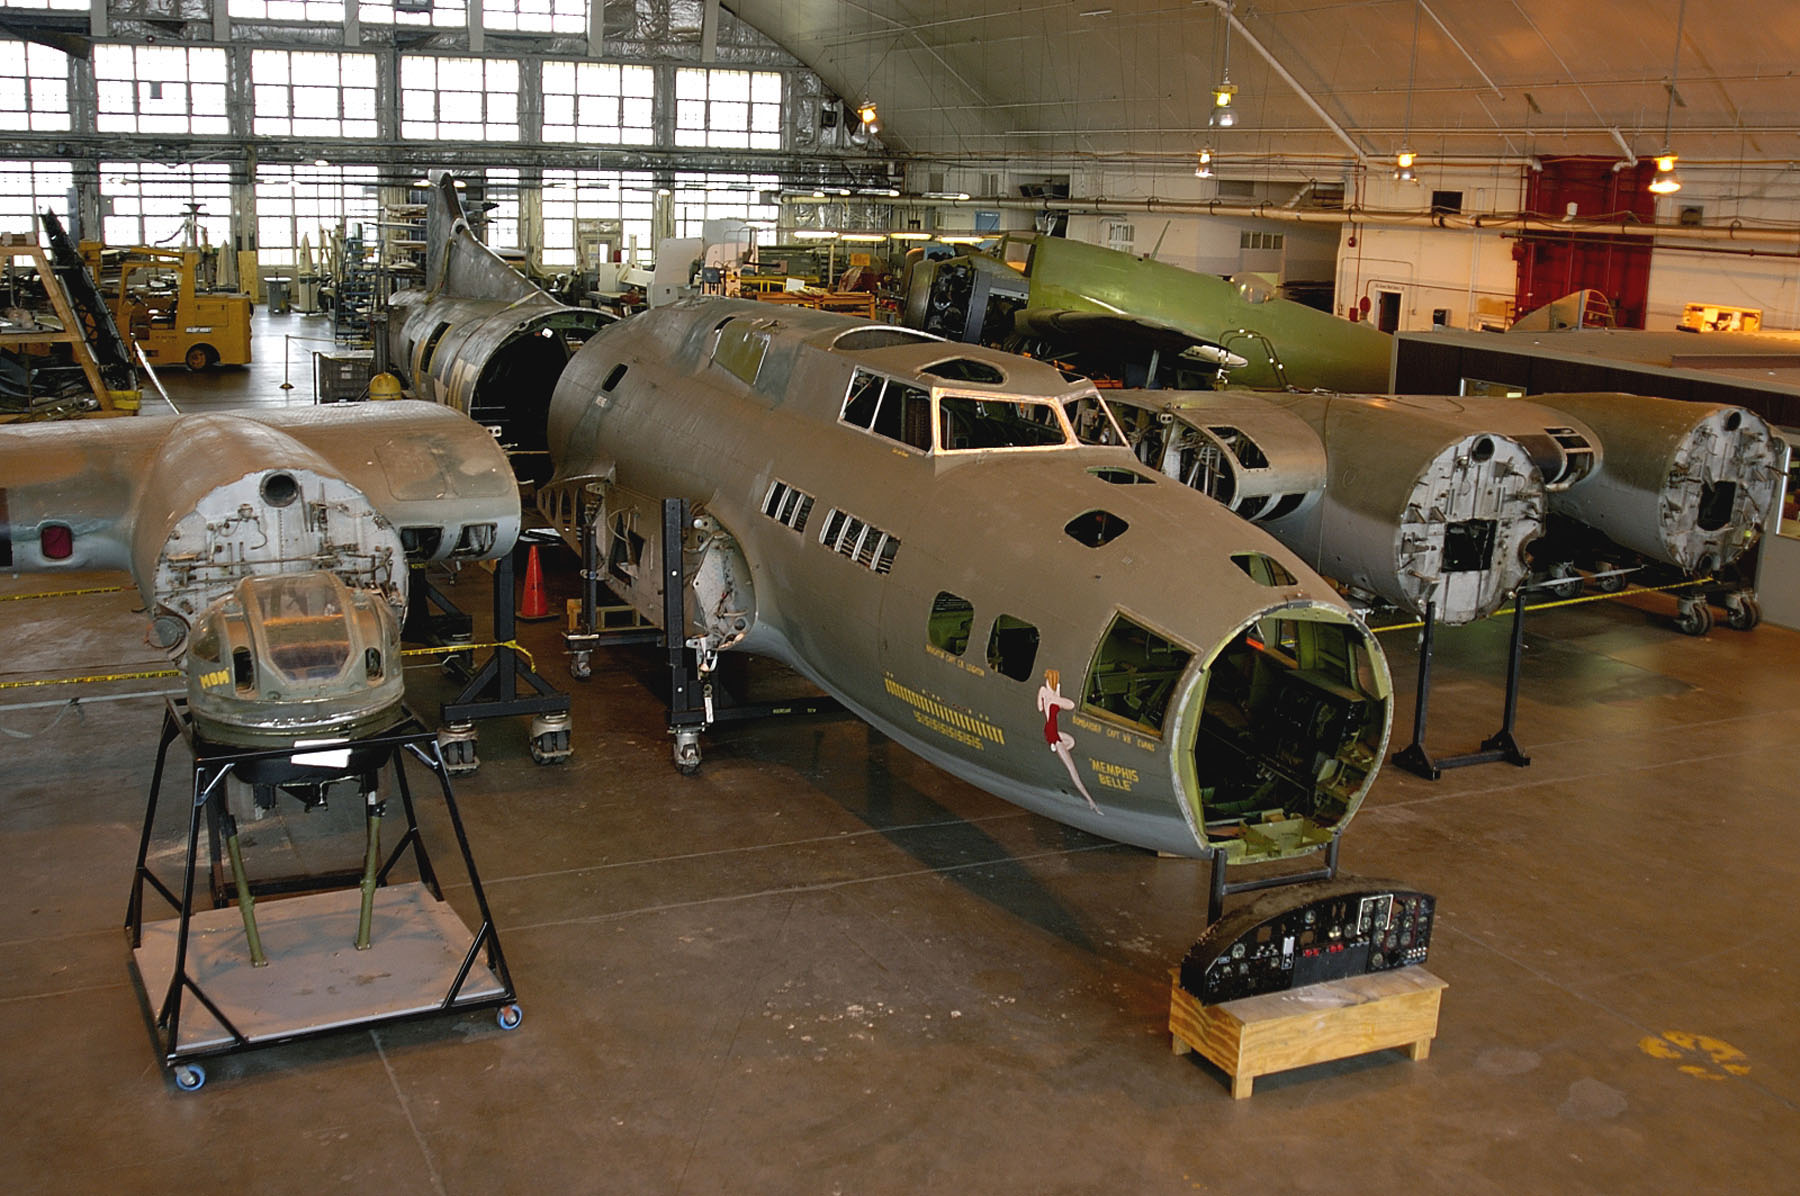 DAYTON, Ohio -- The B-17F "Memphis Belle" is readied for restoration at the National Museum of the United States Air Force. (U.S. Air Force photo)